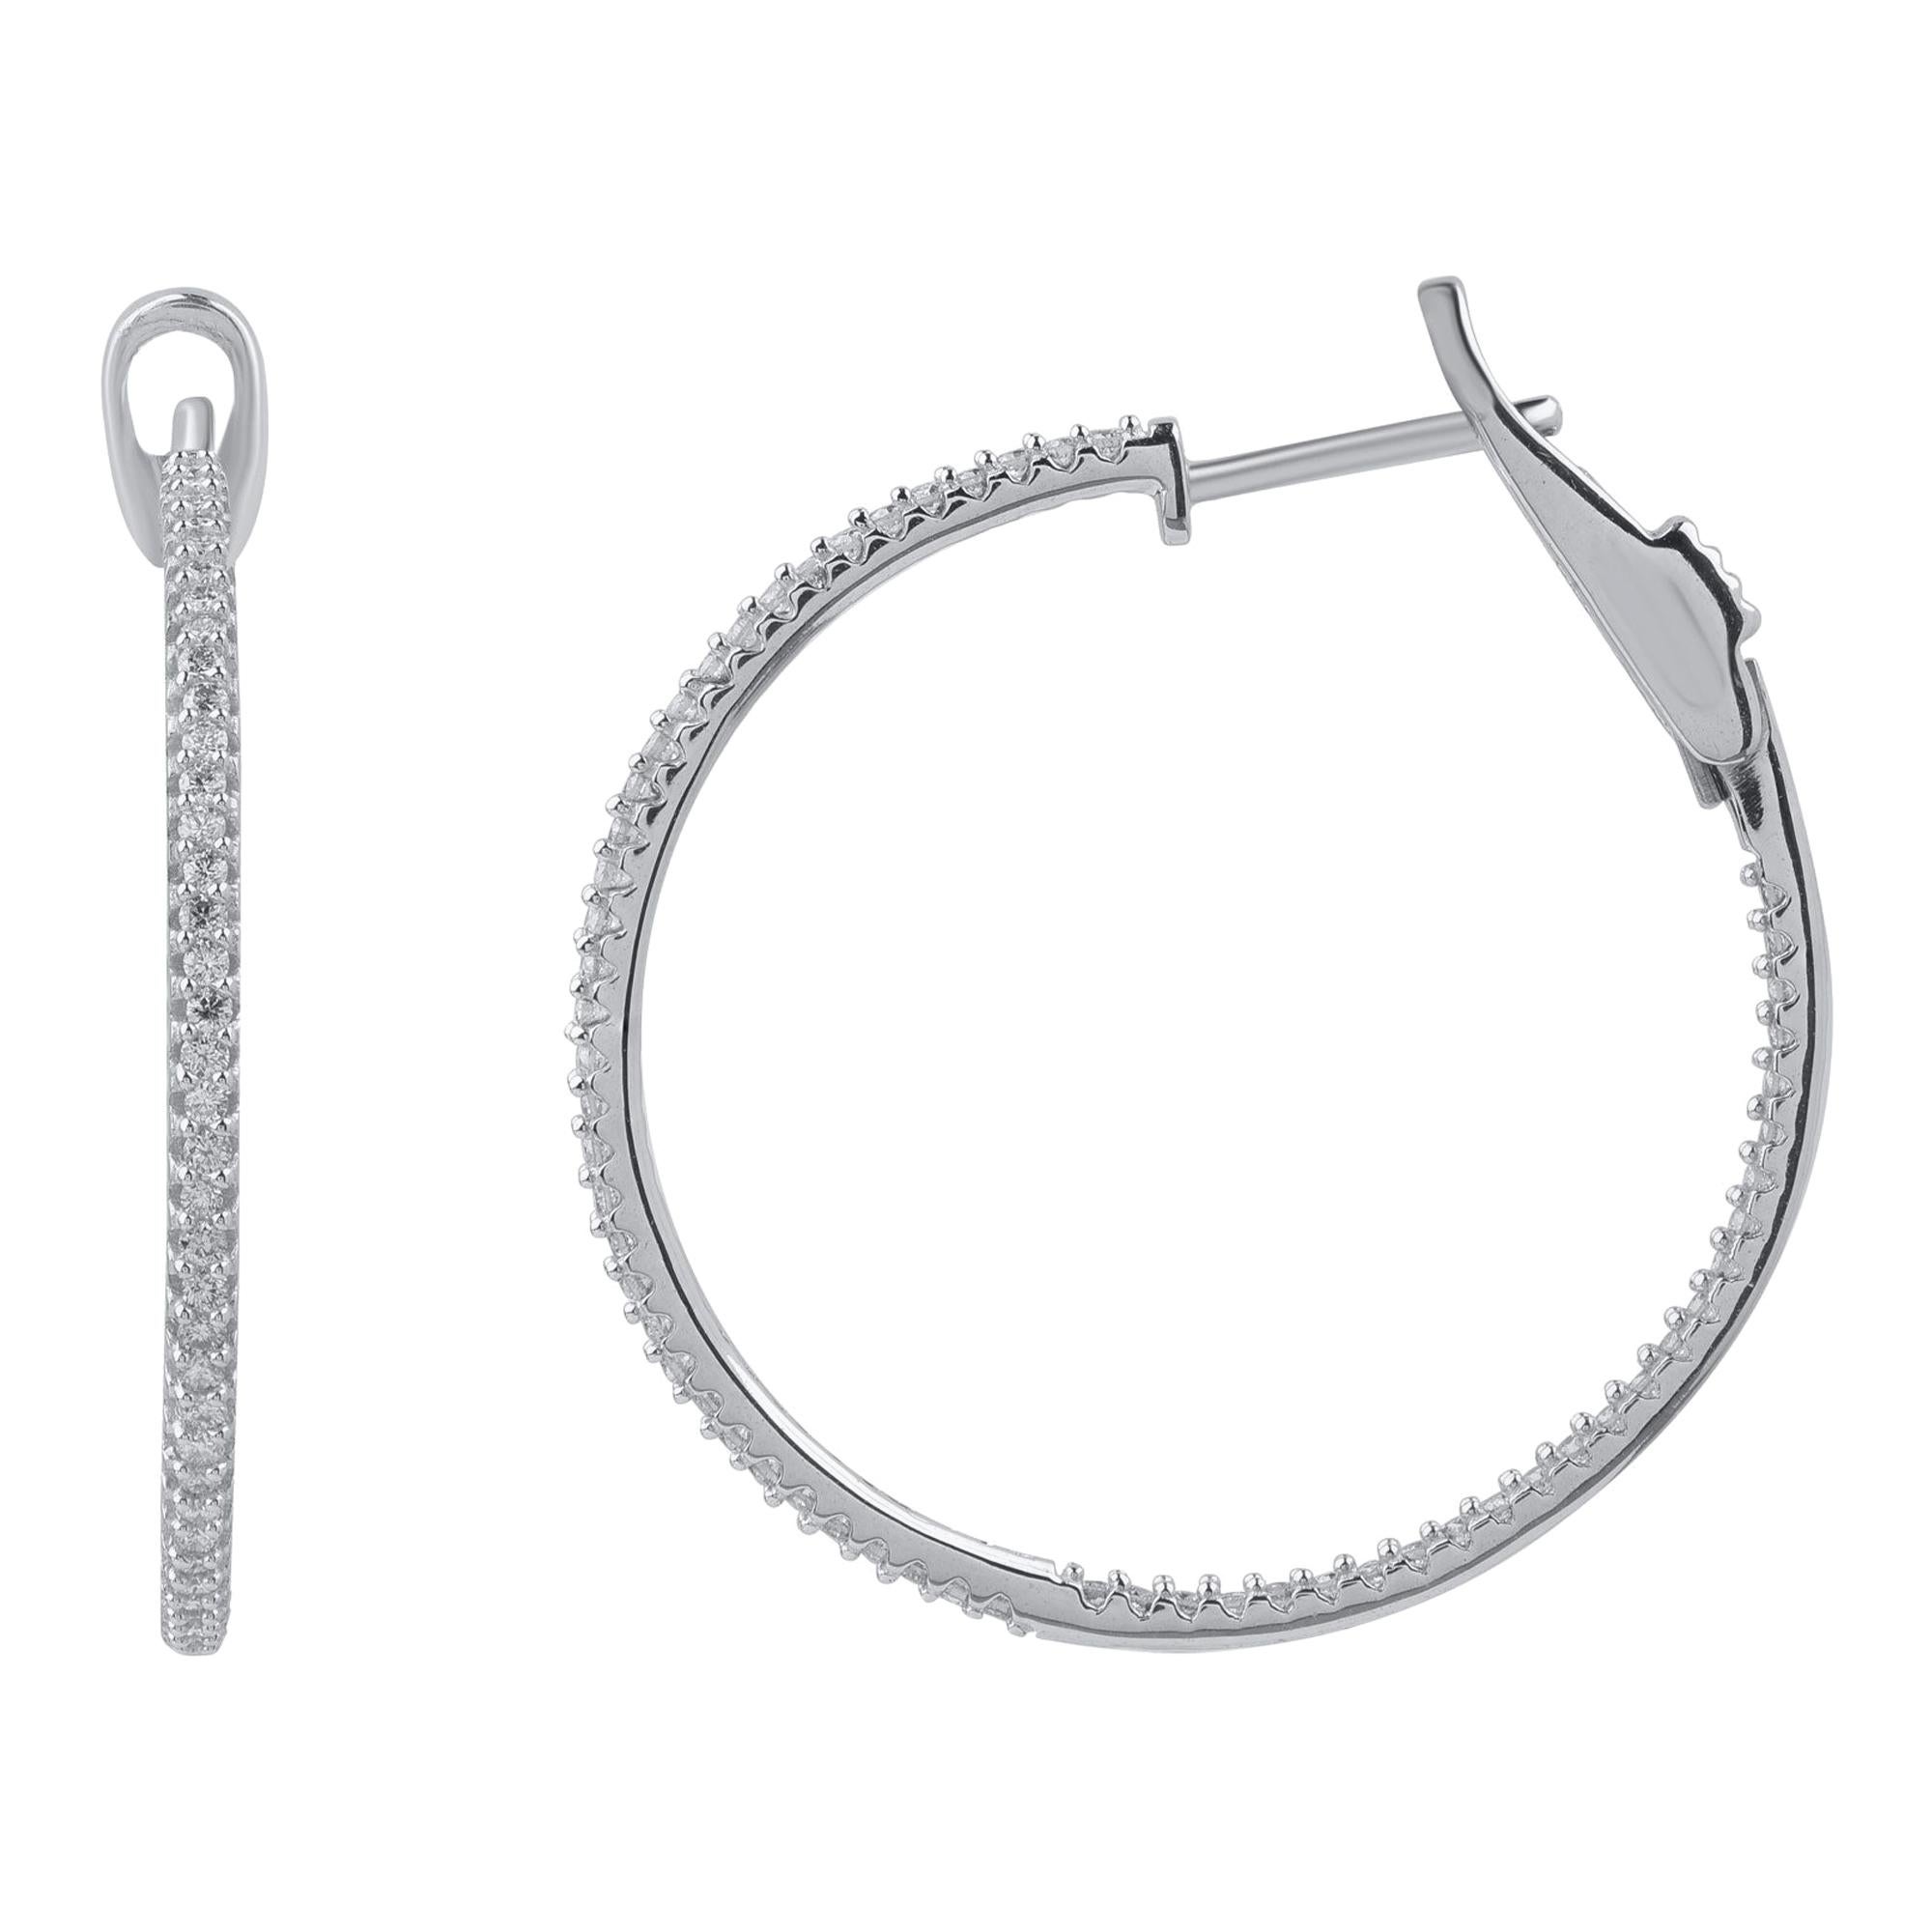 These diamond hoop earrings will brighten up your everyday look. These sleek diamond hoop earrings are accented with 122 round-cut diamonds in prong setting and hand-crafted by our in-house experts in 10 kt white gold. Diamonds are graded H-I Color,